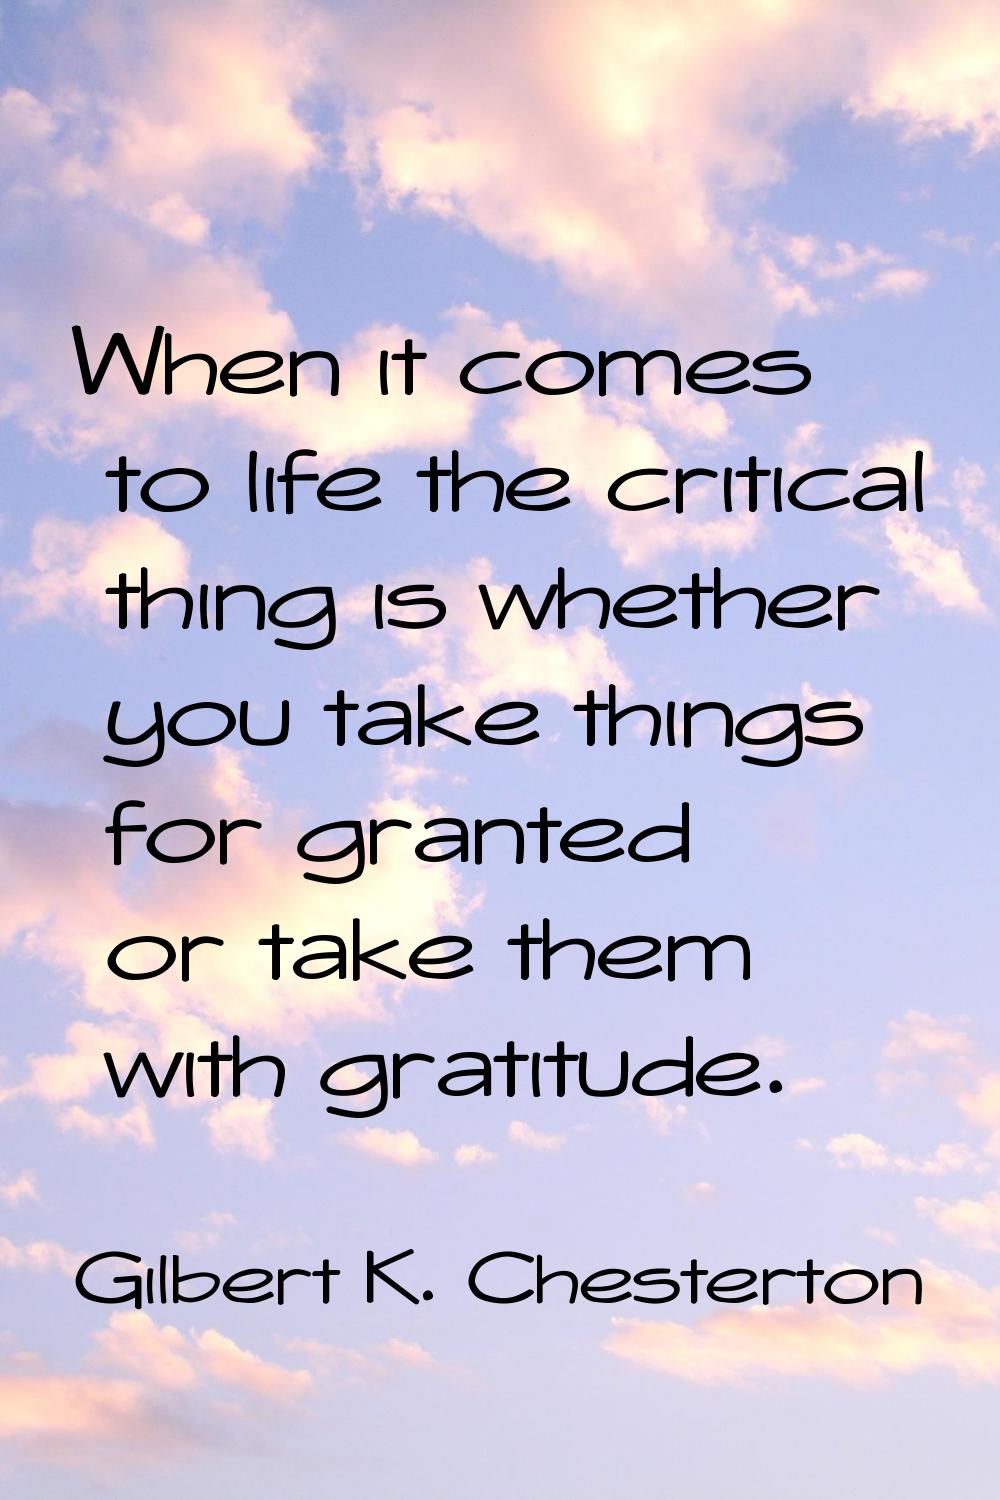 When it comes to life the critical thing is whether you take things for granted or take them with g